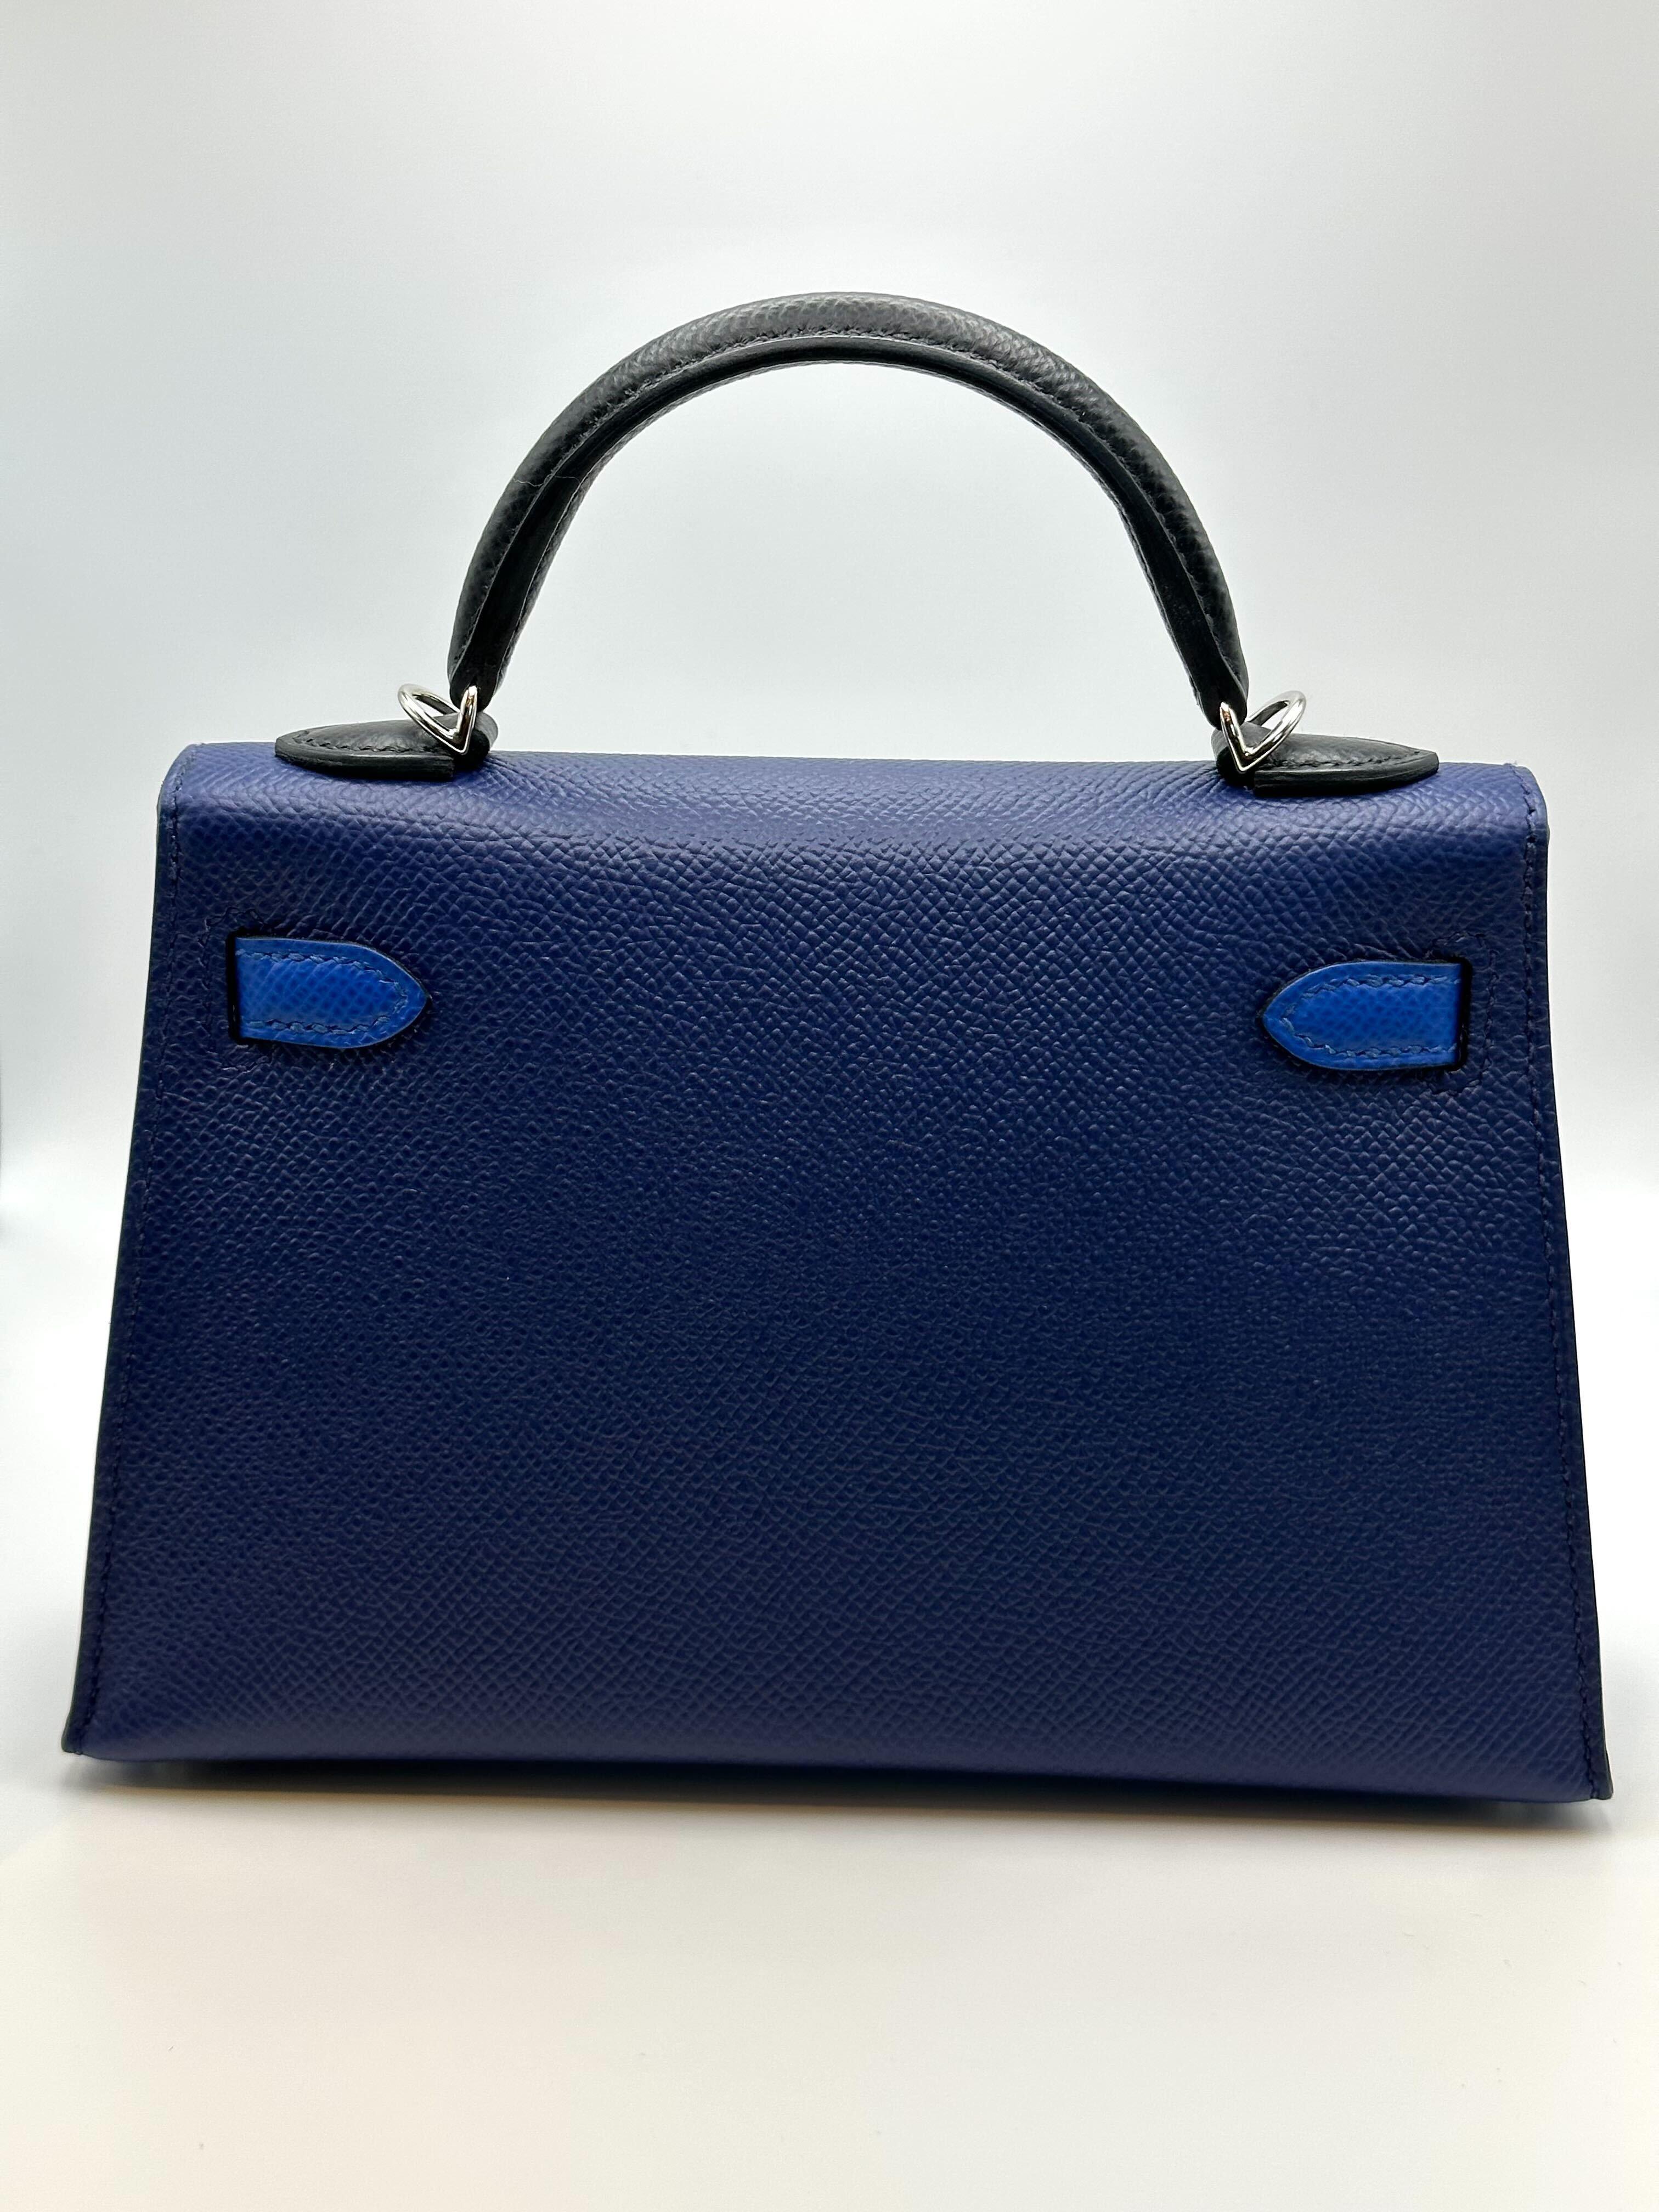 Hermes Kelly II Mini Epsom Tricolore Blue Saphir/Blue France/Black Palladium In New Condition For Sale In New York, NY